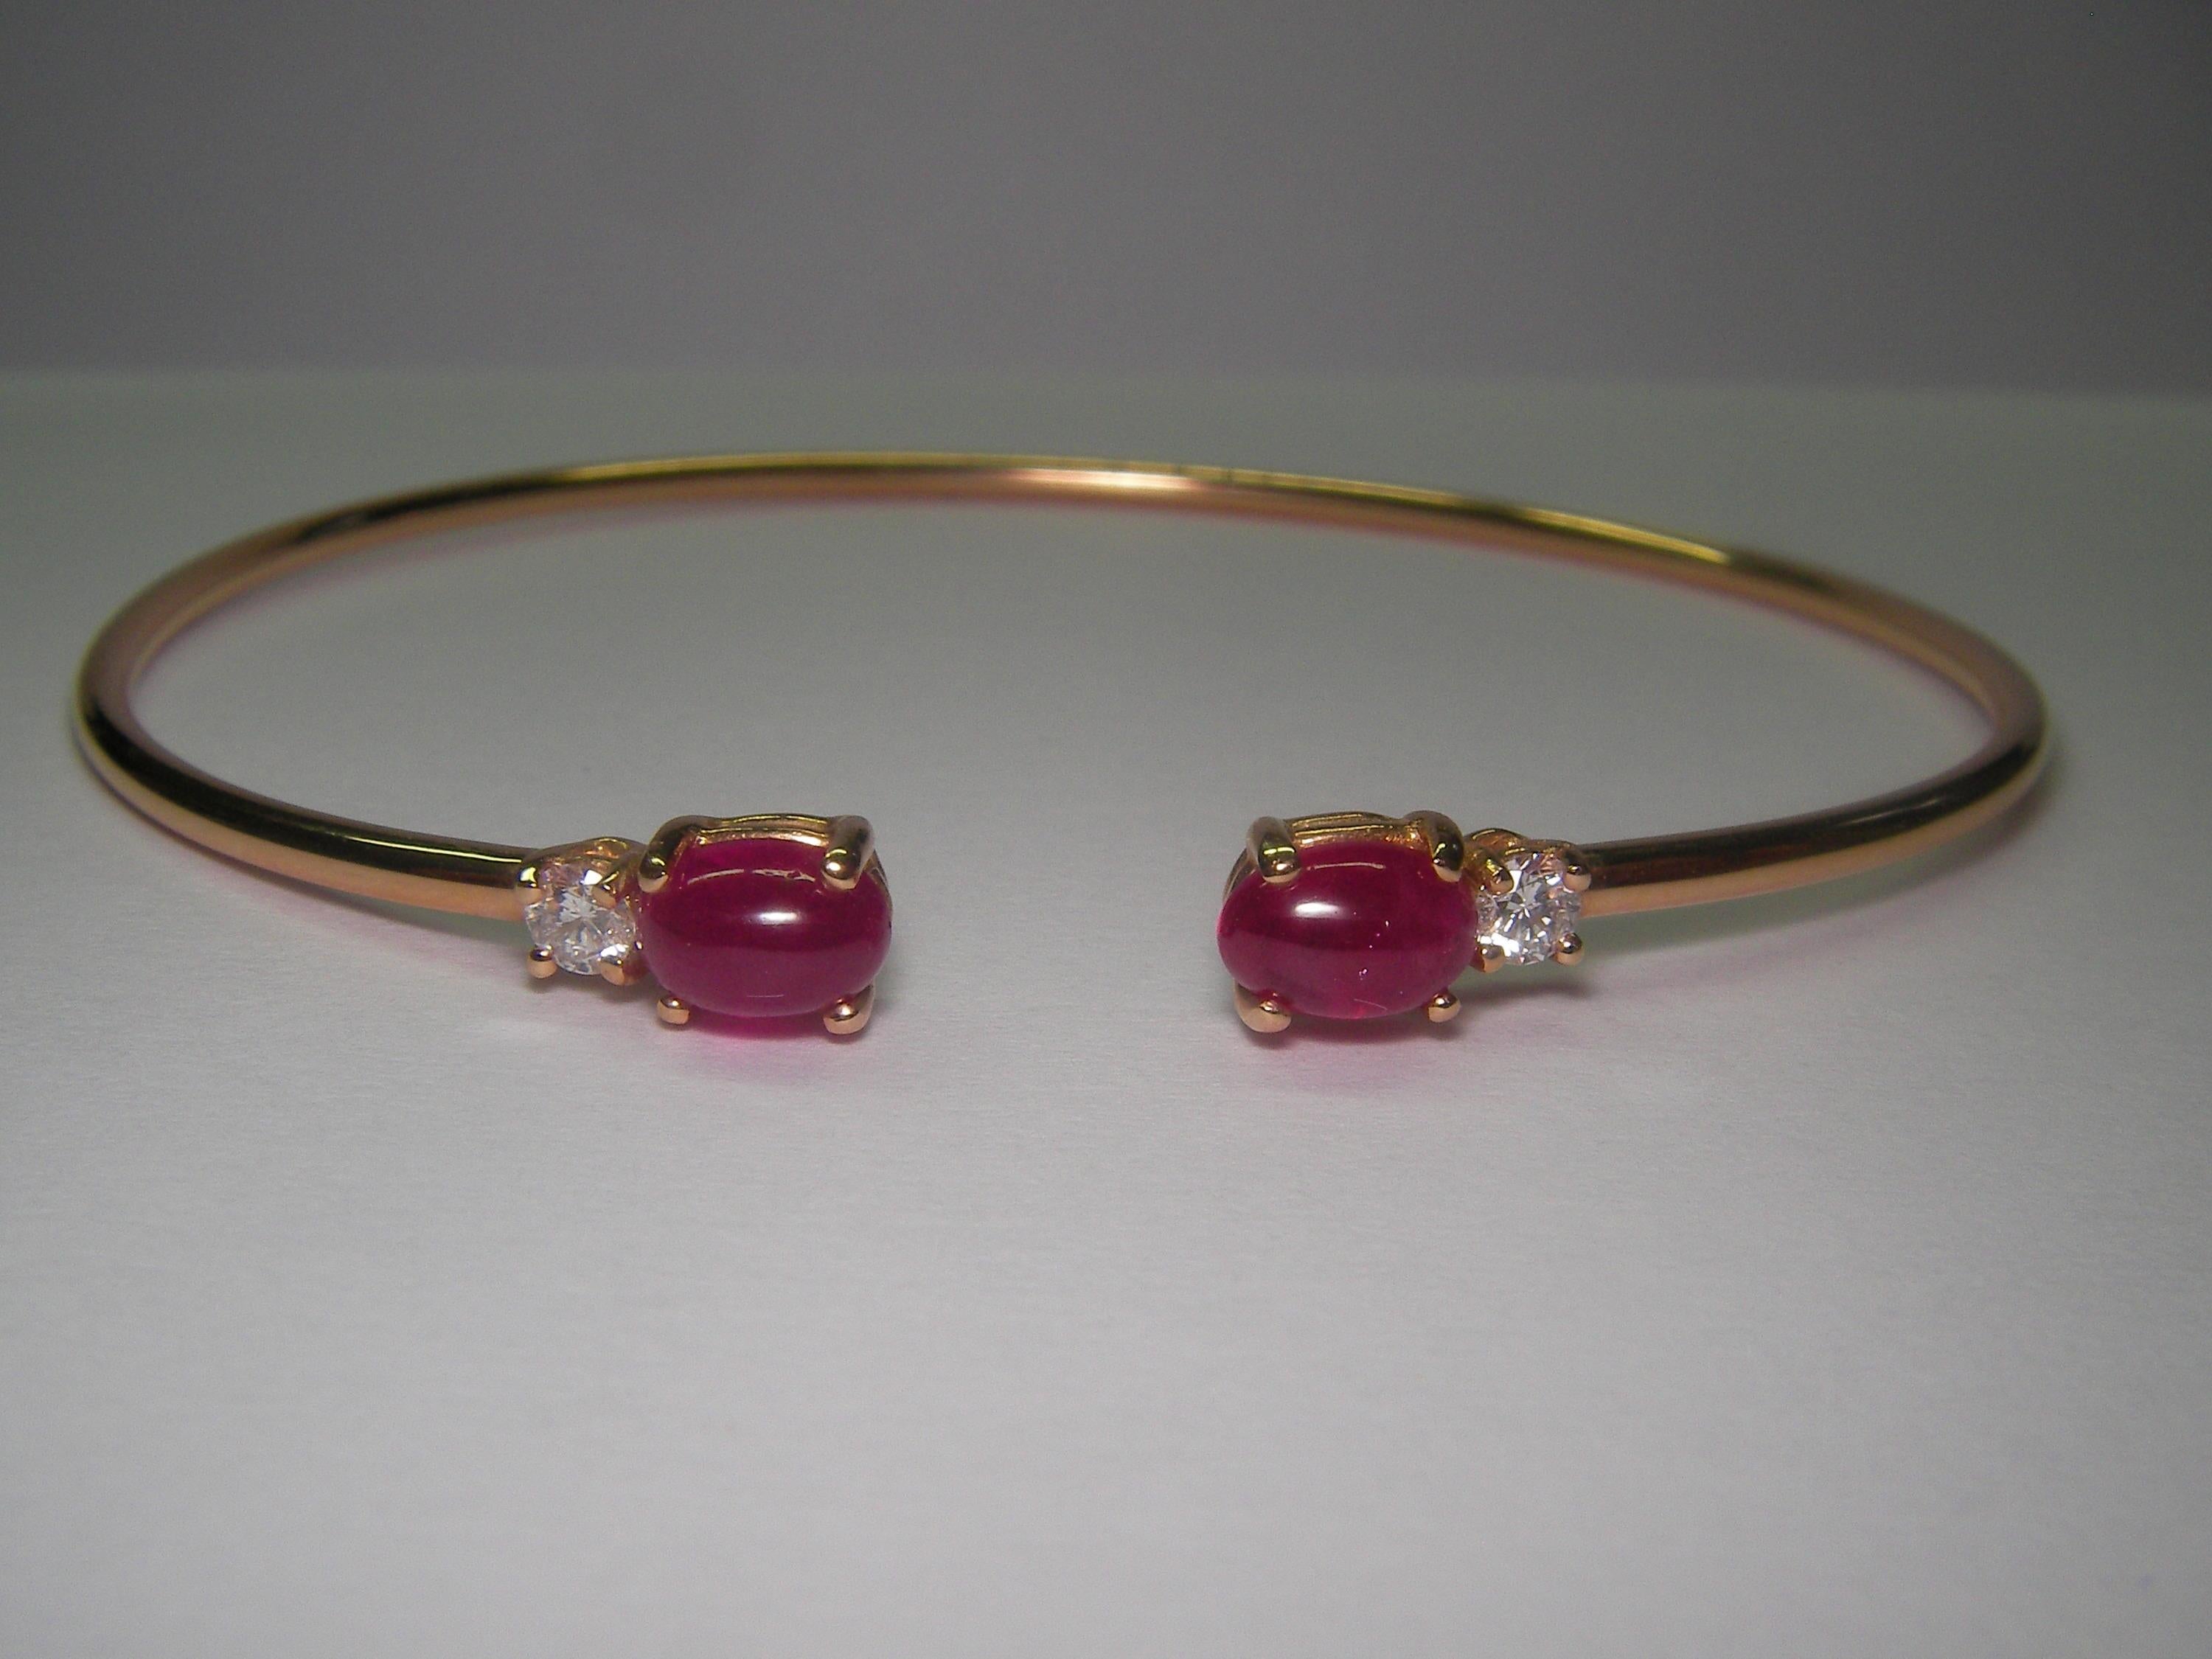 18 Karat Rose Gold Diamond and Ruby Bracelet

2 Diamonds 0.16 Carat H SI
2 Ruby 1.57 Carat
5,7 x 5.0 cm


Founded in 1974, Gianni Lazzaro is a family-owned jewelry company based out of Düsseldorf, Germany.
Although rooted in Germany, Gianni